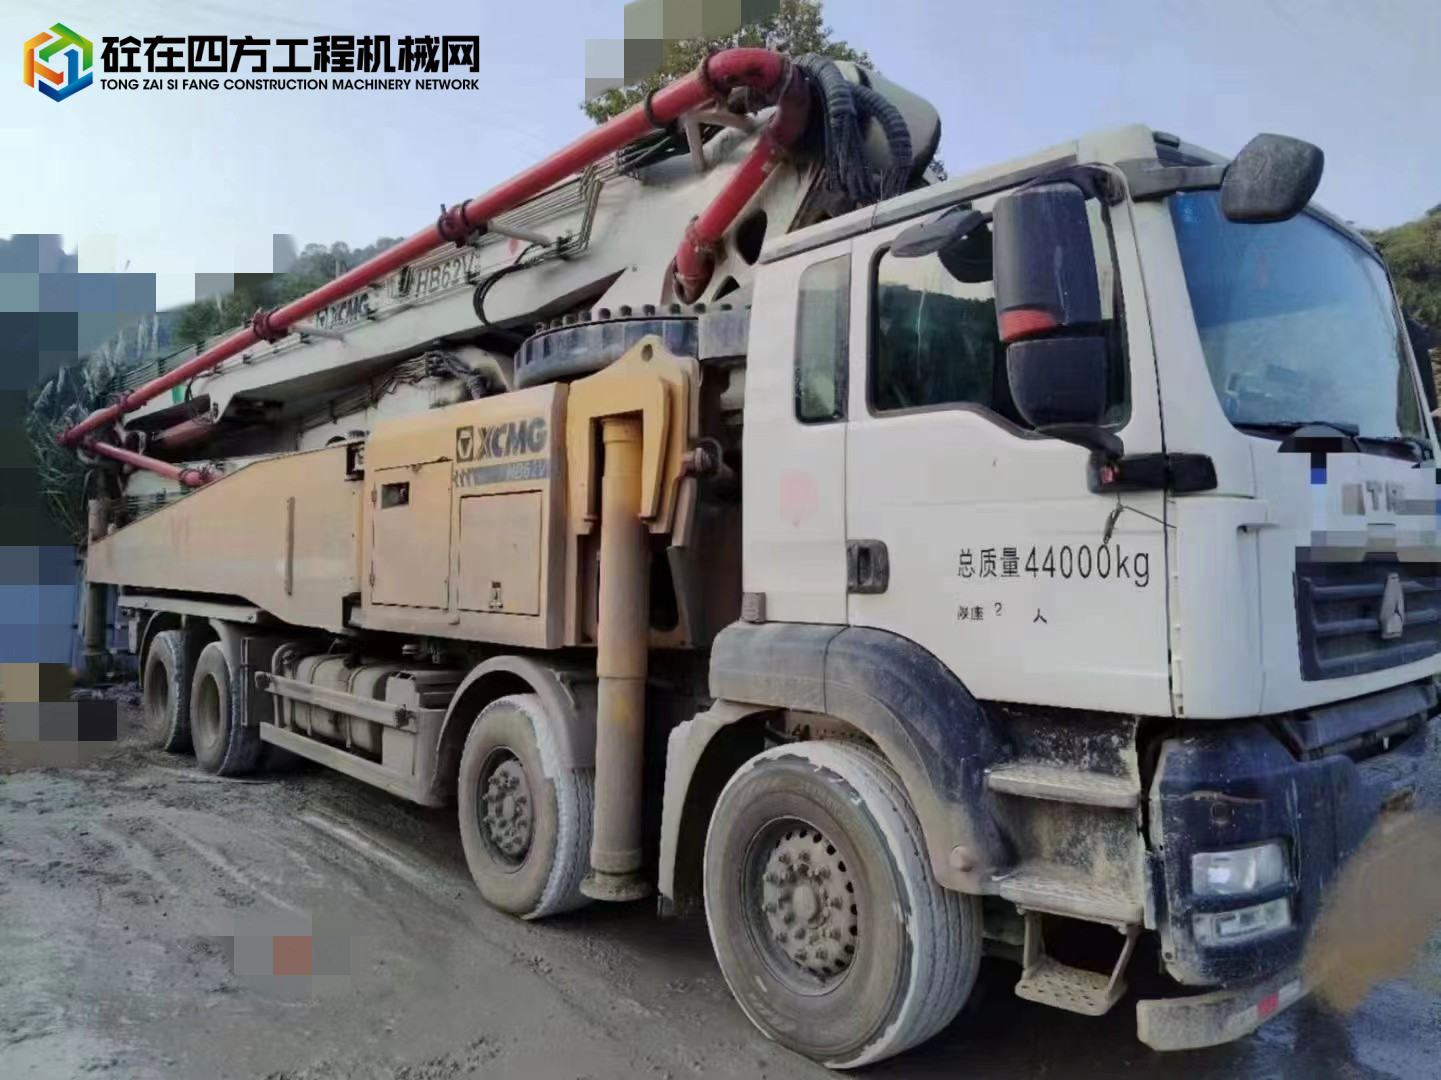 https://images.tongzsf.com/tong/truck_machine/20231226/1658a6645a6f43.jpg